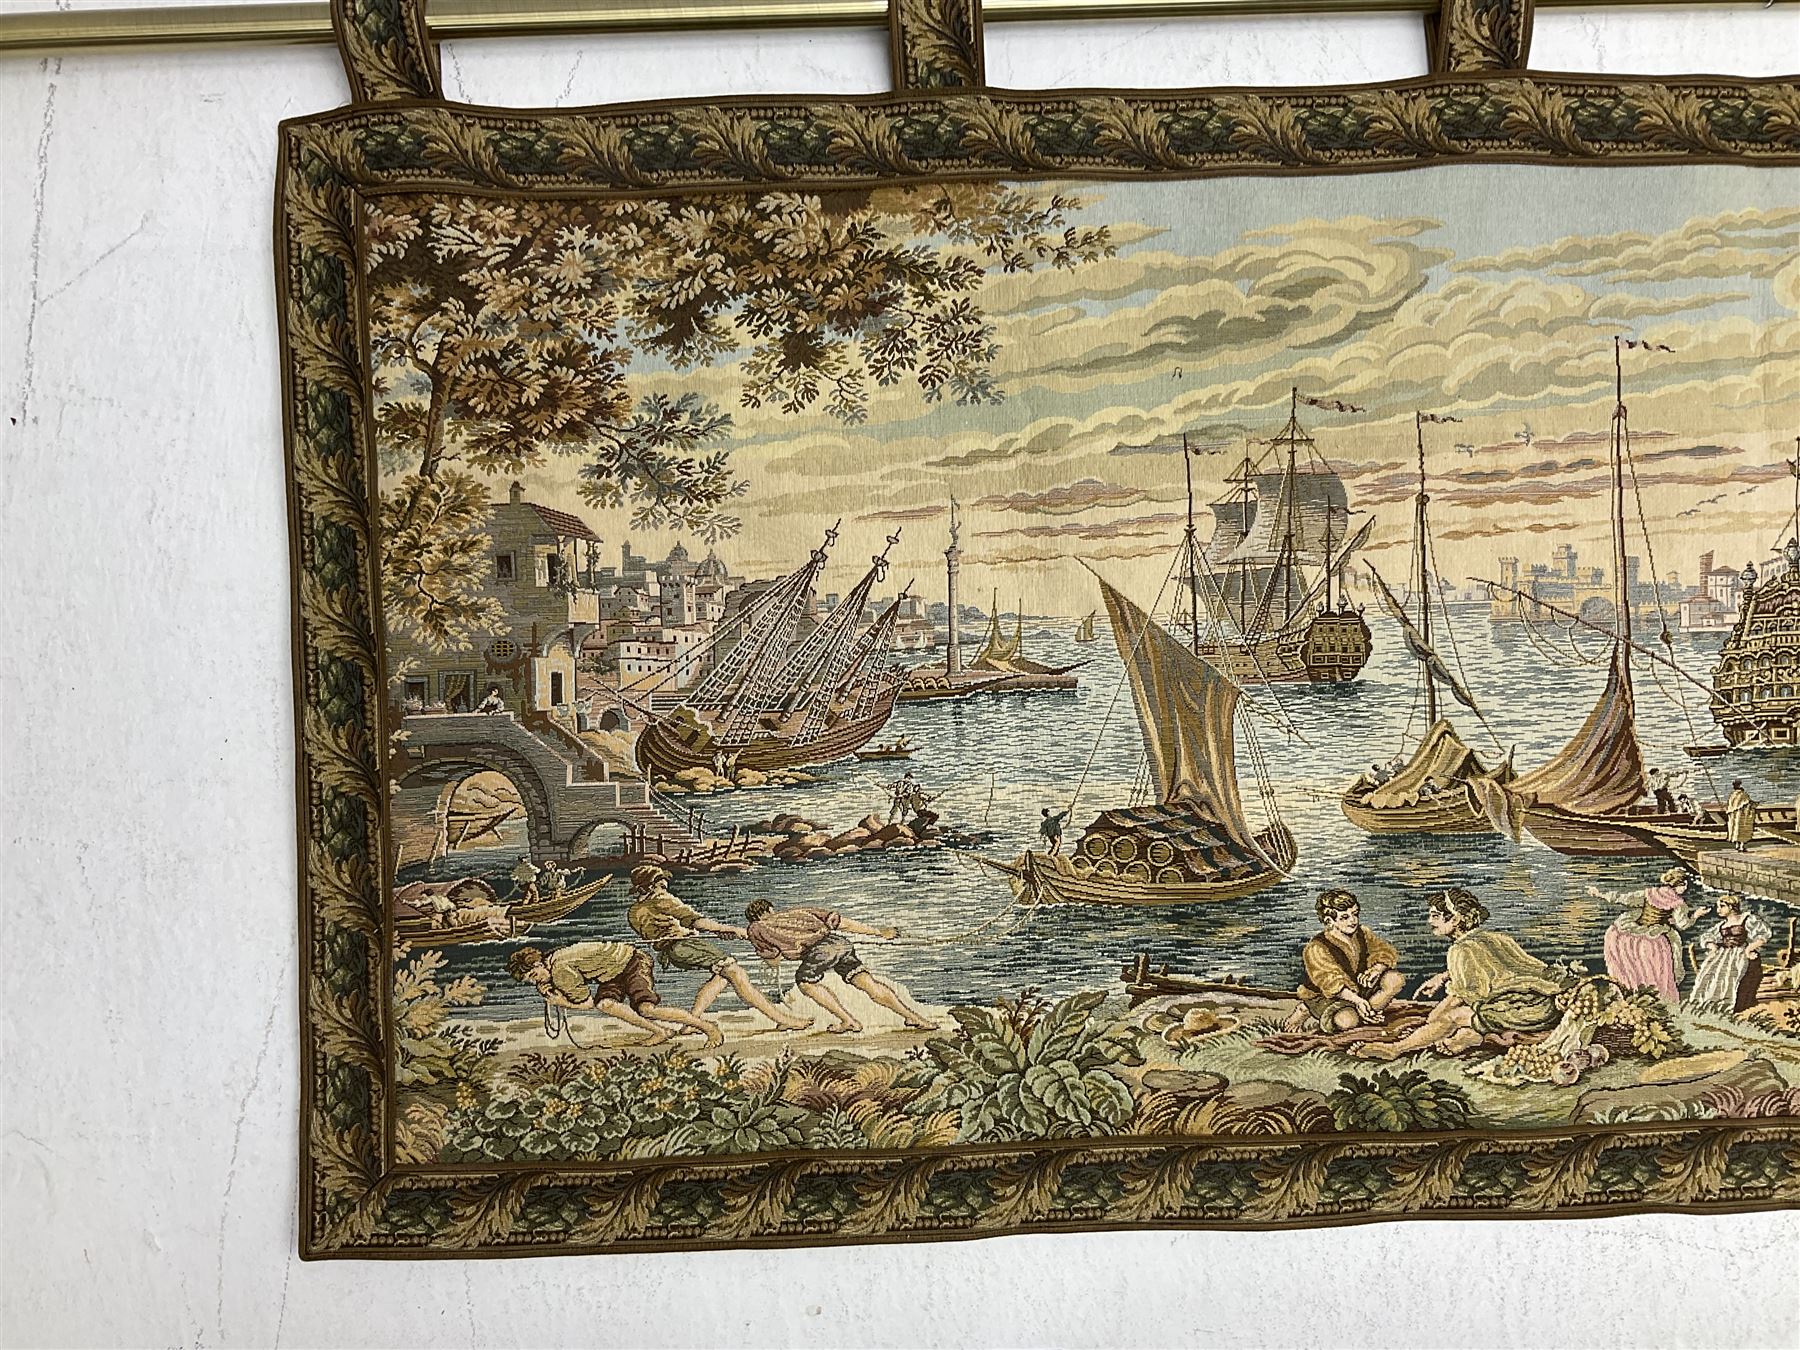 20th century tapestry style wall hanging depicting 17th century port scene - Image 2 of 18